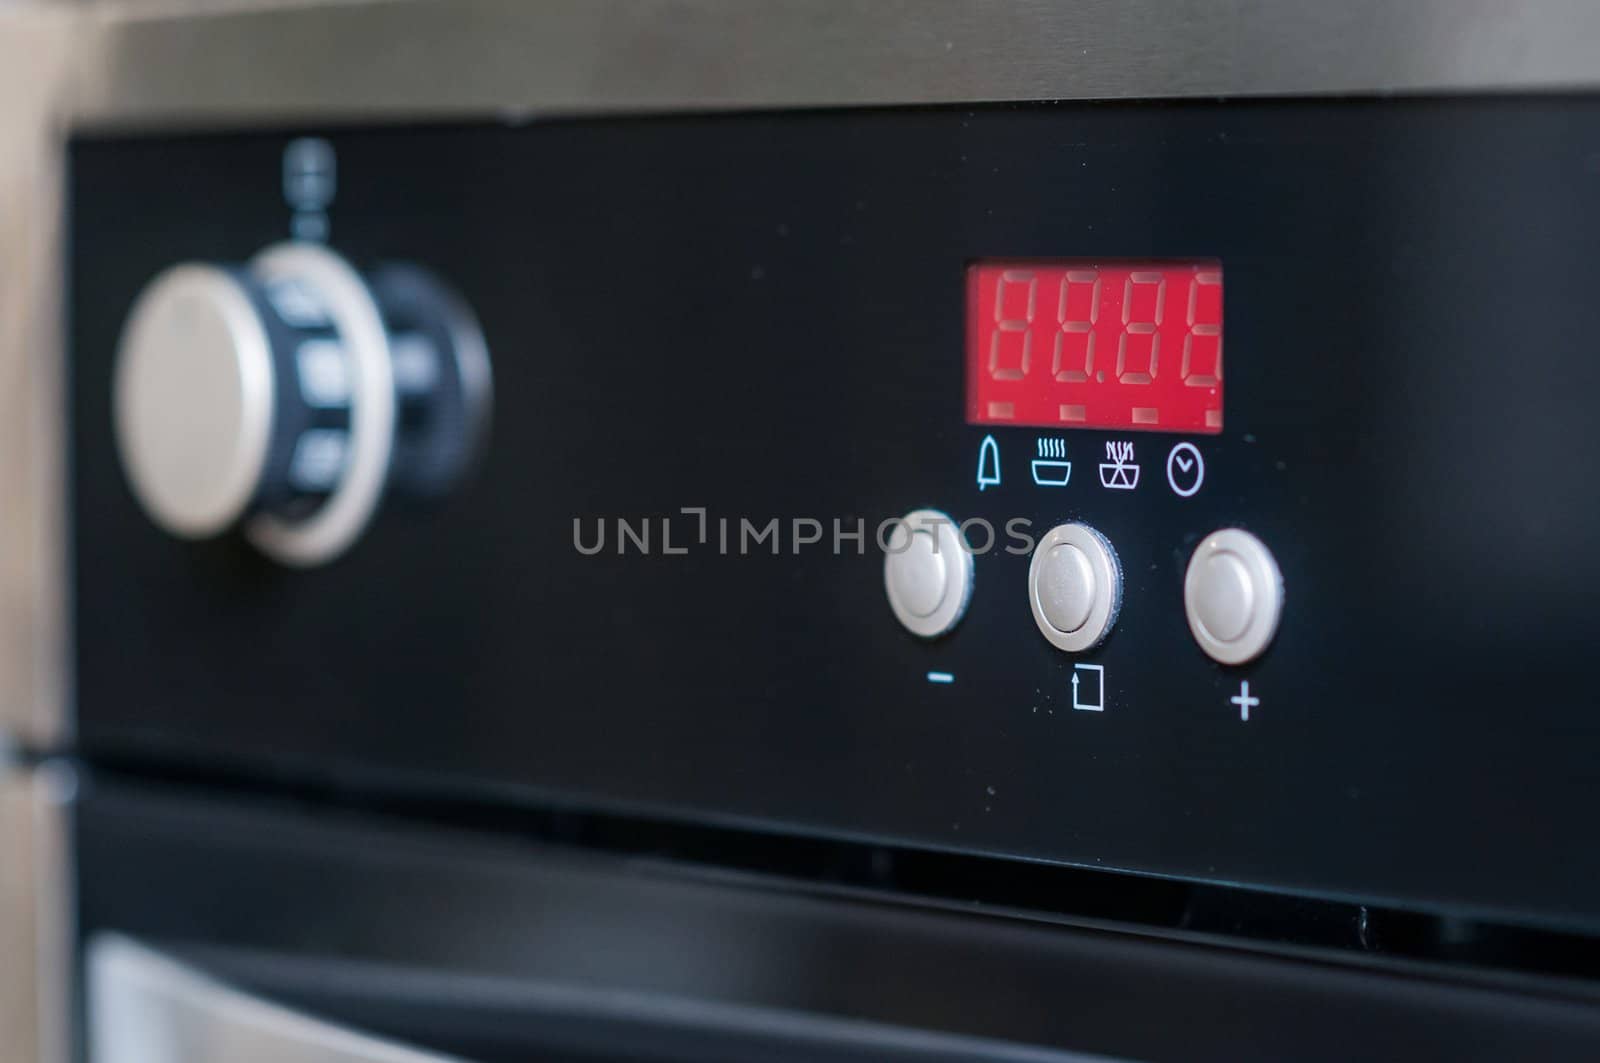 controls on the oven for a close-up